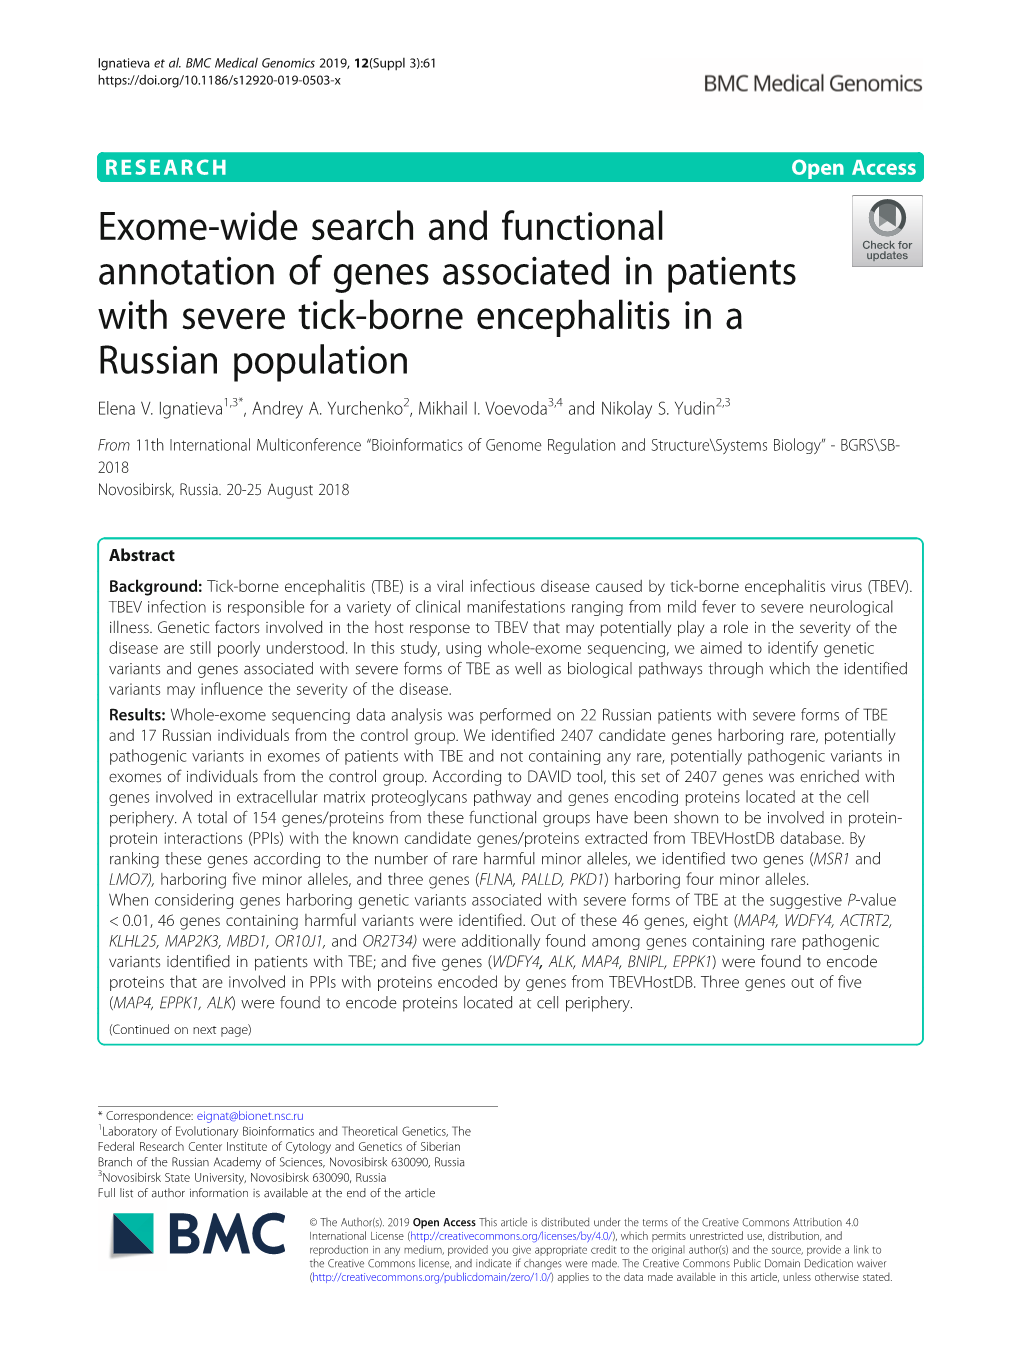 Exome-Wide Search and Functional Annotation of Genes Associated in Patients with Severe Tick-Borne Encephalitis in a Russian Population Elena V